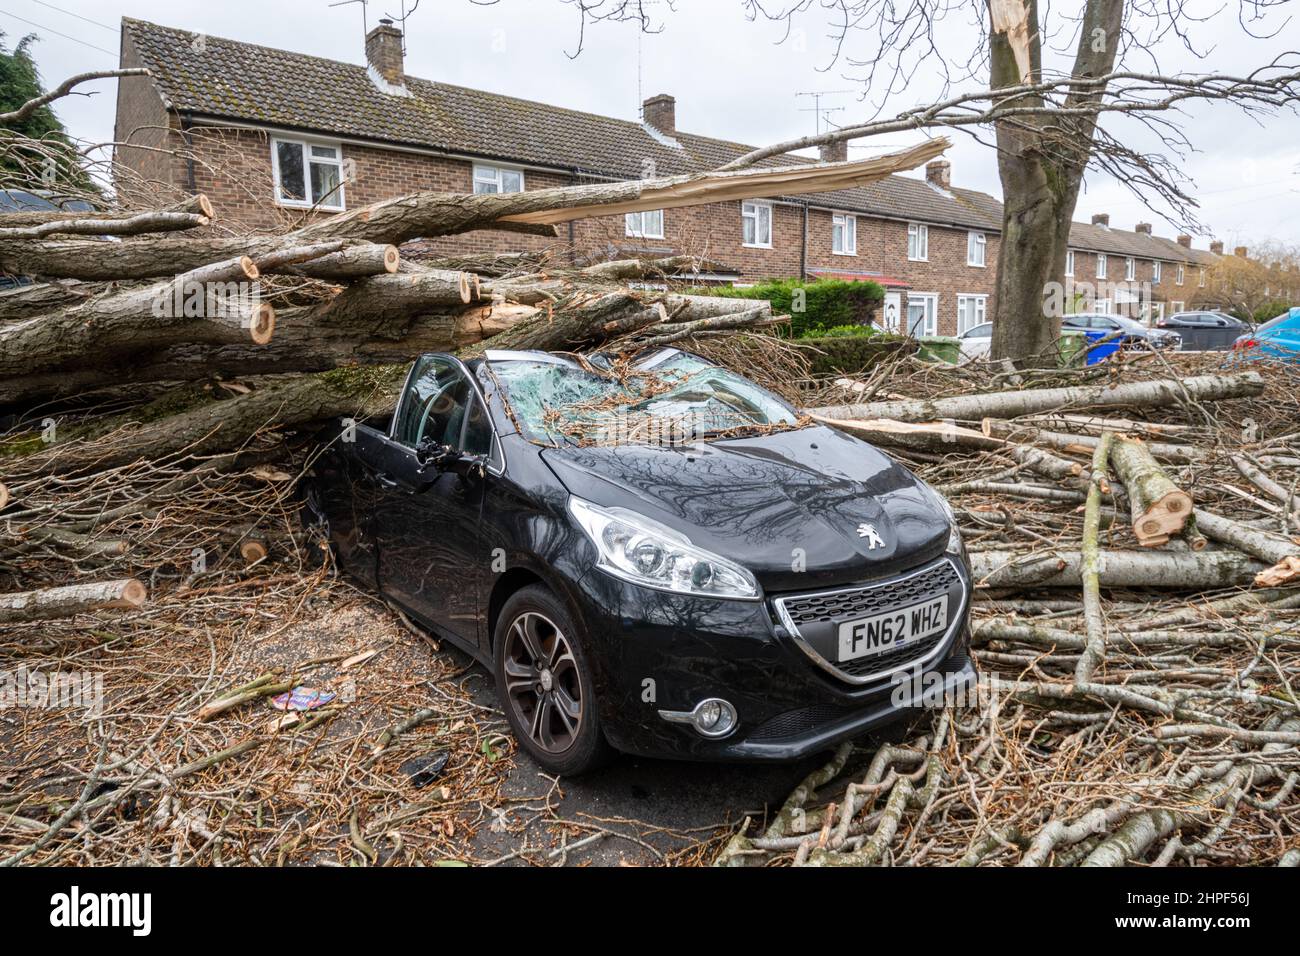 February 2022, Storm Eunice Damage. A car parked outside houses was crushed by a large fallen tree during storm Eunice in Marrowbrook Lane, Farnborough, Hampshire, England, UK. The highest wind speed ever seen in England of 122 mph was recorded during the storm which occurred on February 18th, 2022, one of three named storms in 5 days. Extreme weather is linked to the climate change crisis. Stock Photo